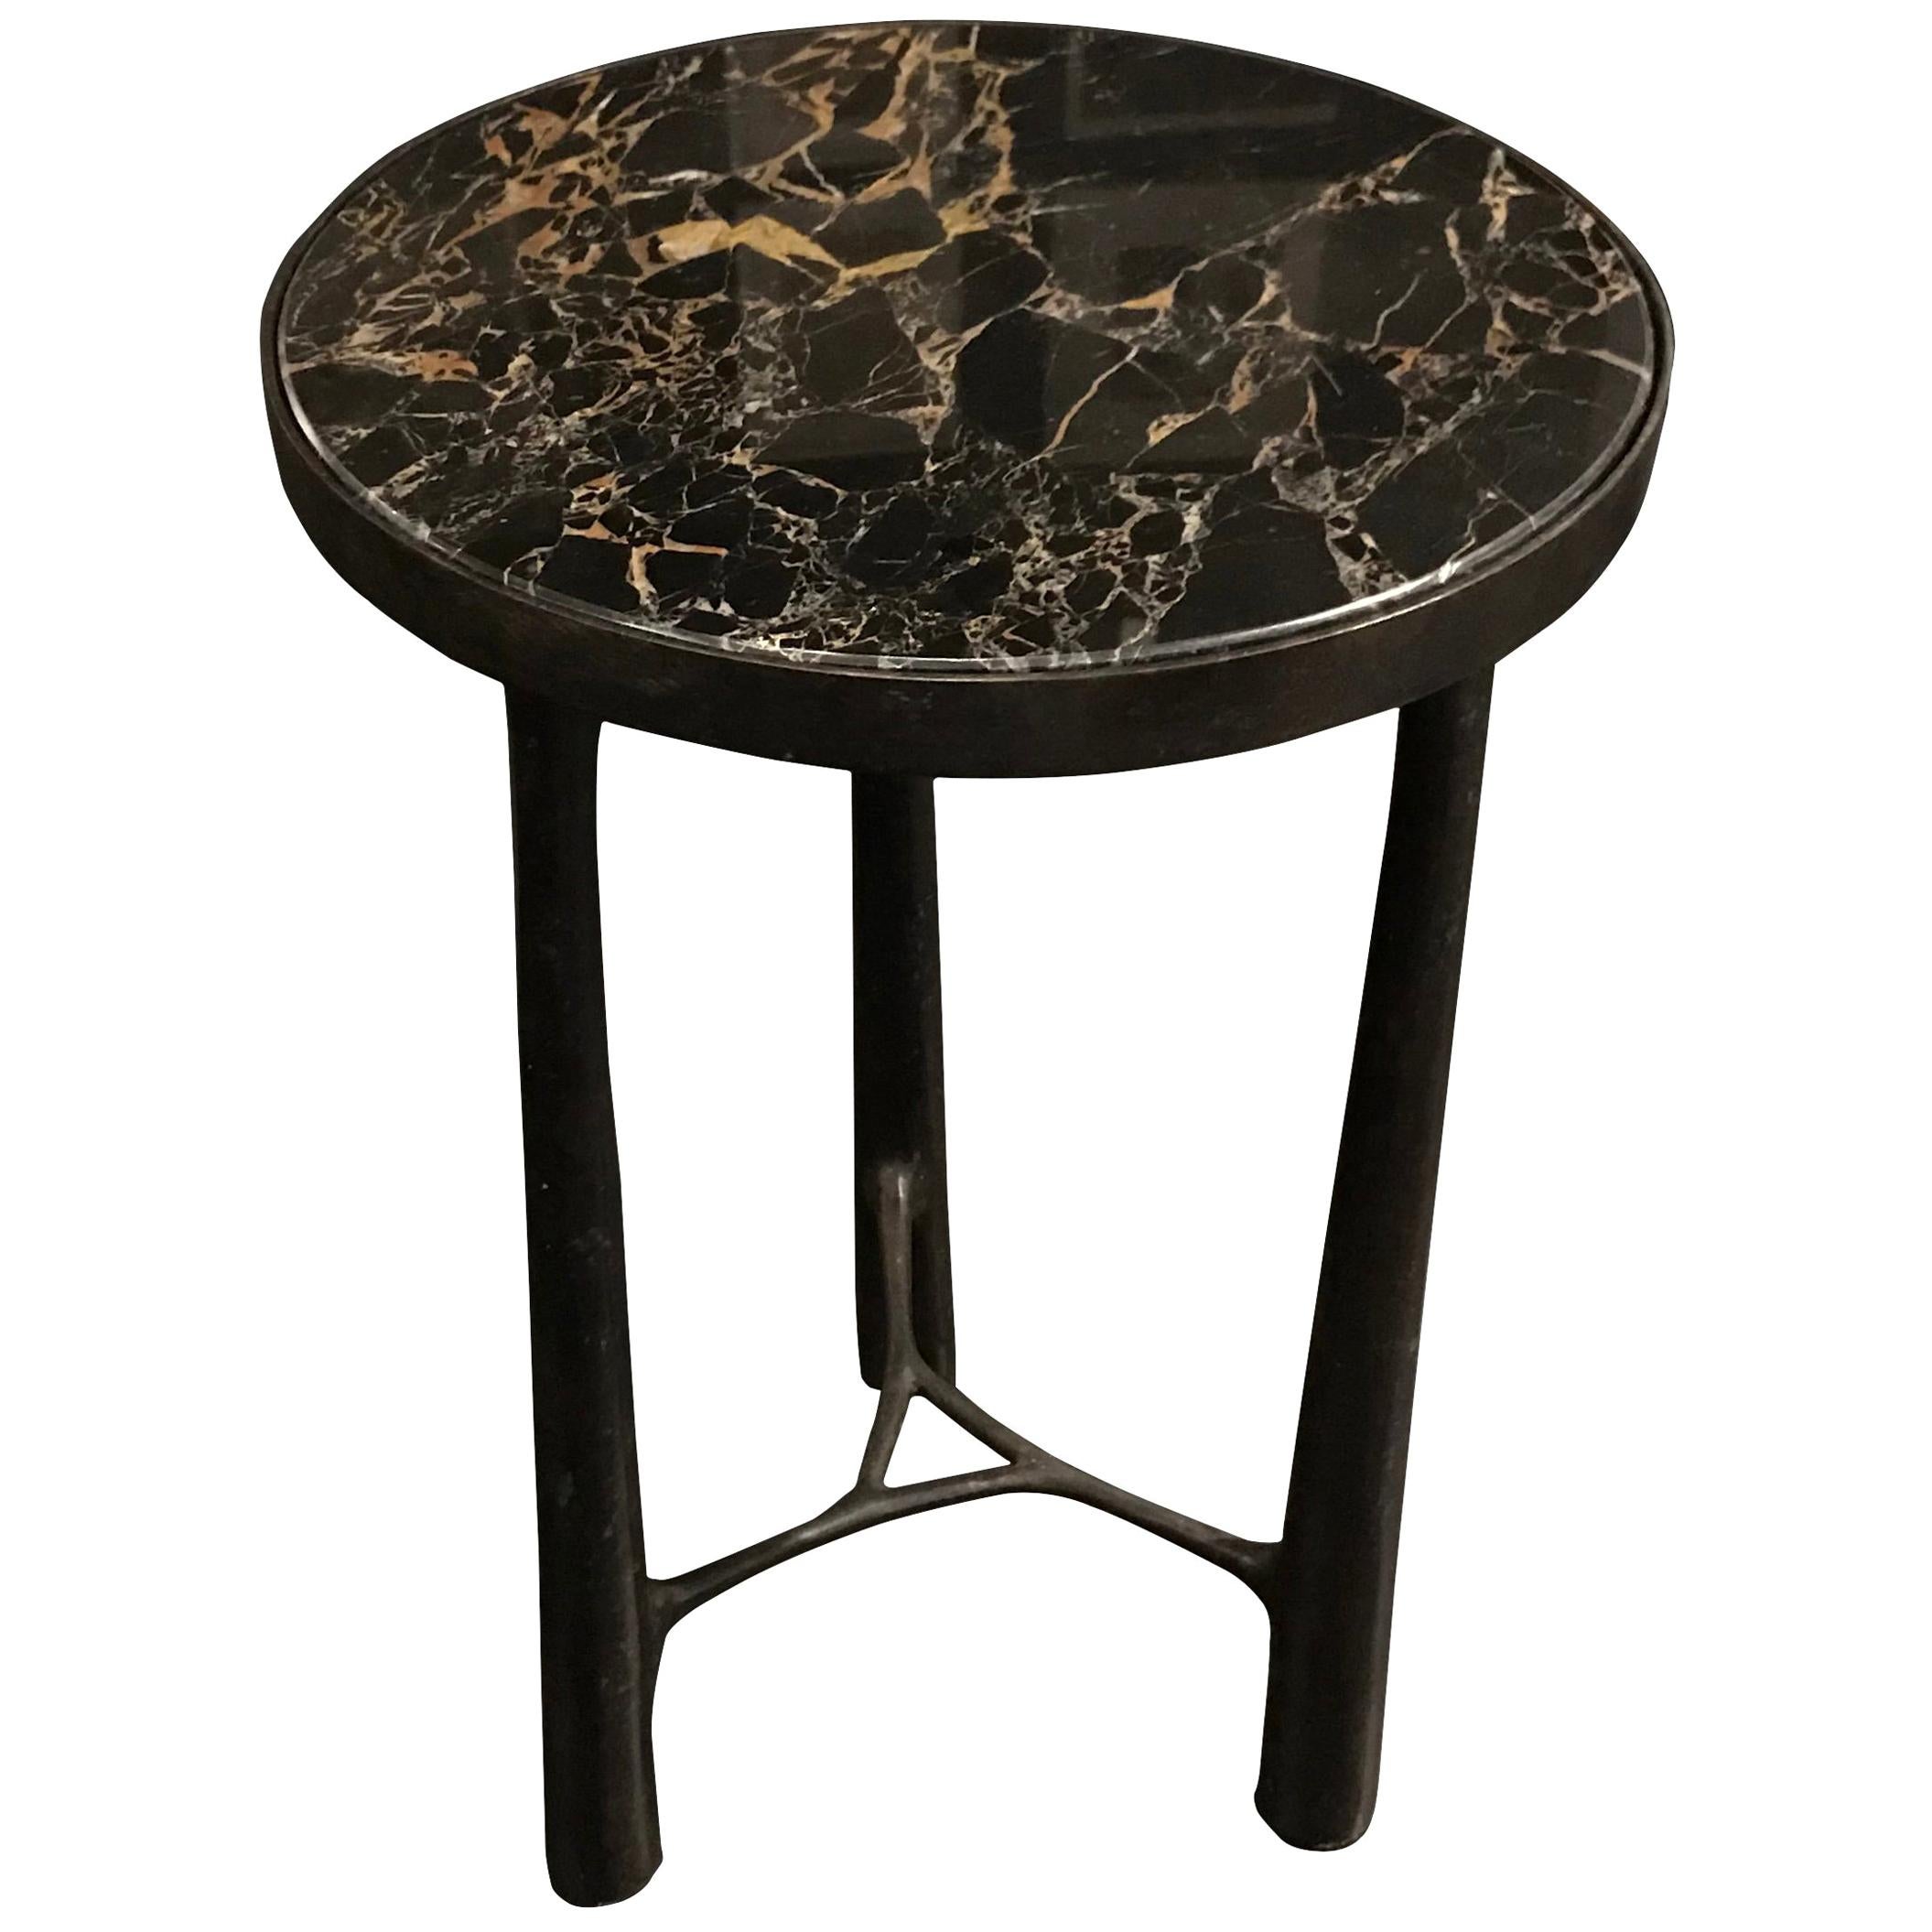 Black Marble-Top, Bronze Base Side Table, Germany, Contemporary